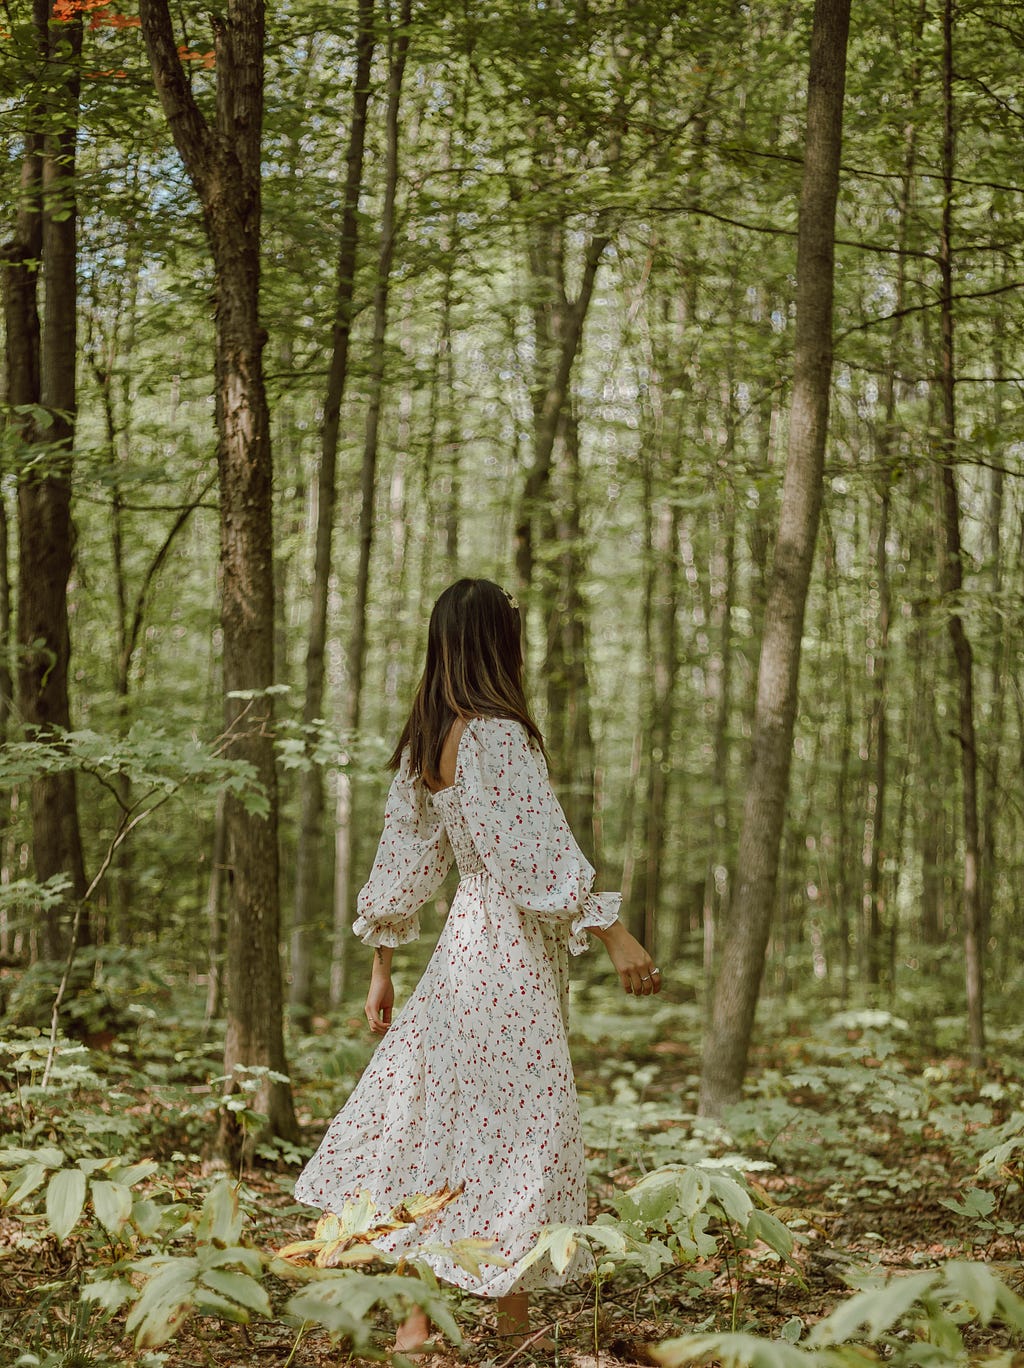 A girl is taking a solitary walk in the woods so that she can hear her inner thoughts better.